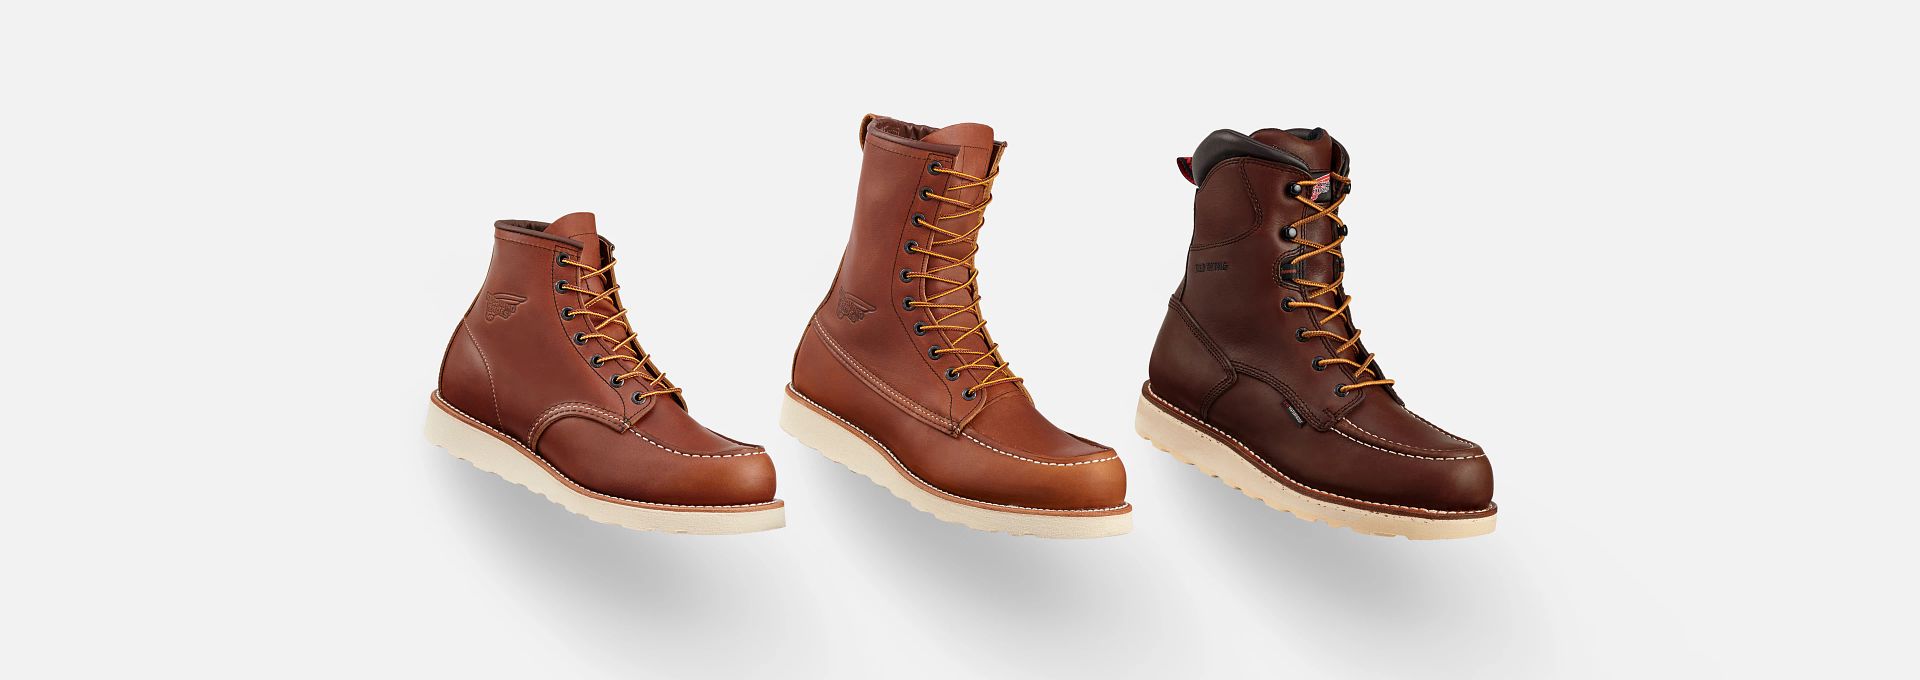 red wing traction tred